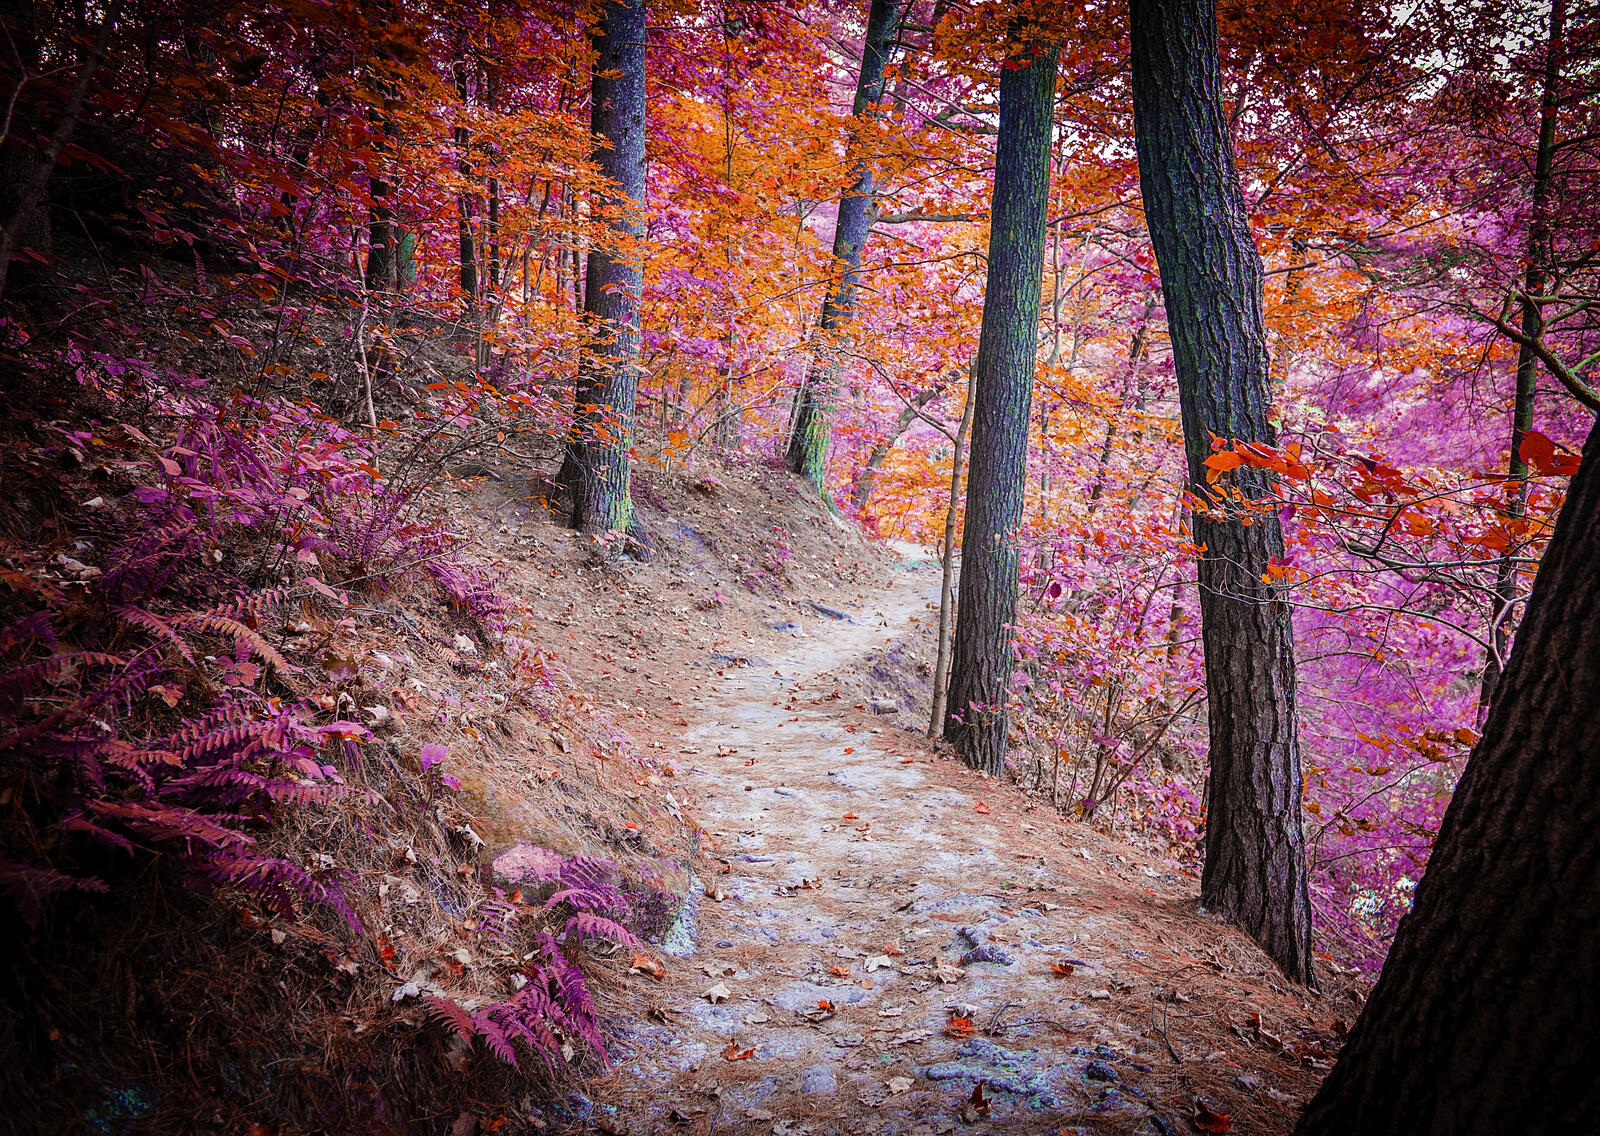 Wallpapers road through the forest landscapes autumn on the desktop